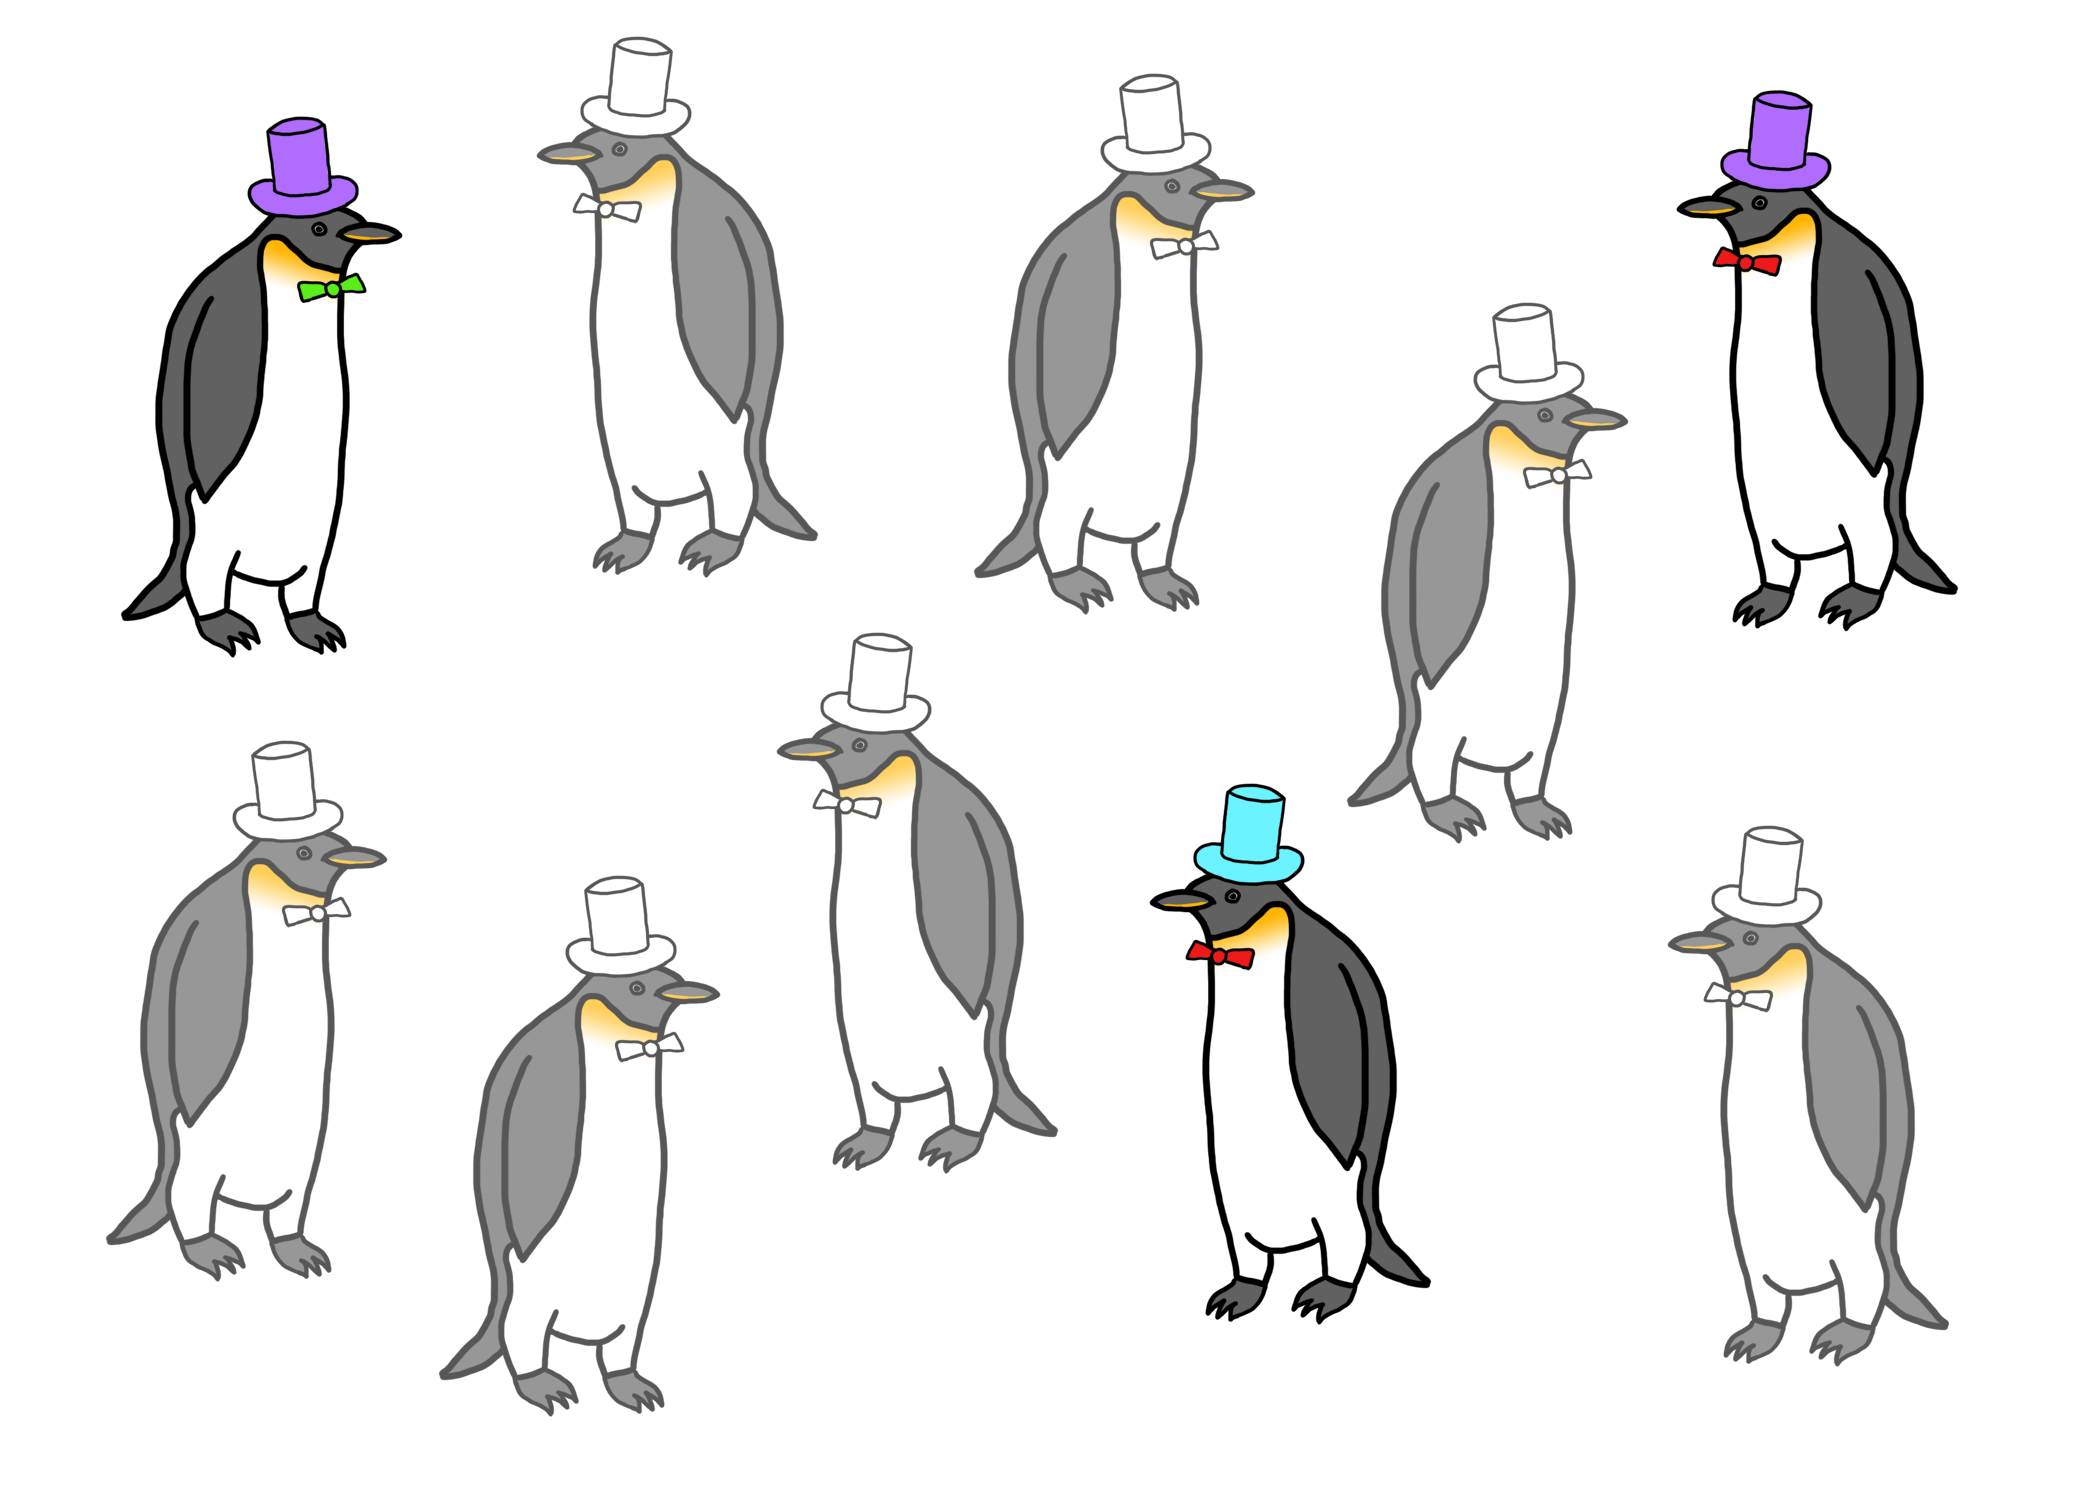 Sample of 3 Penguins from Population